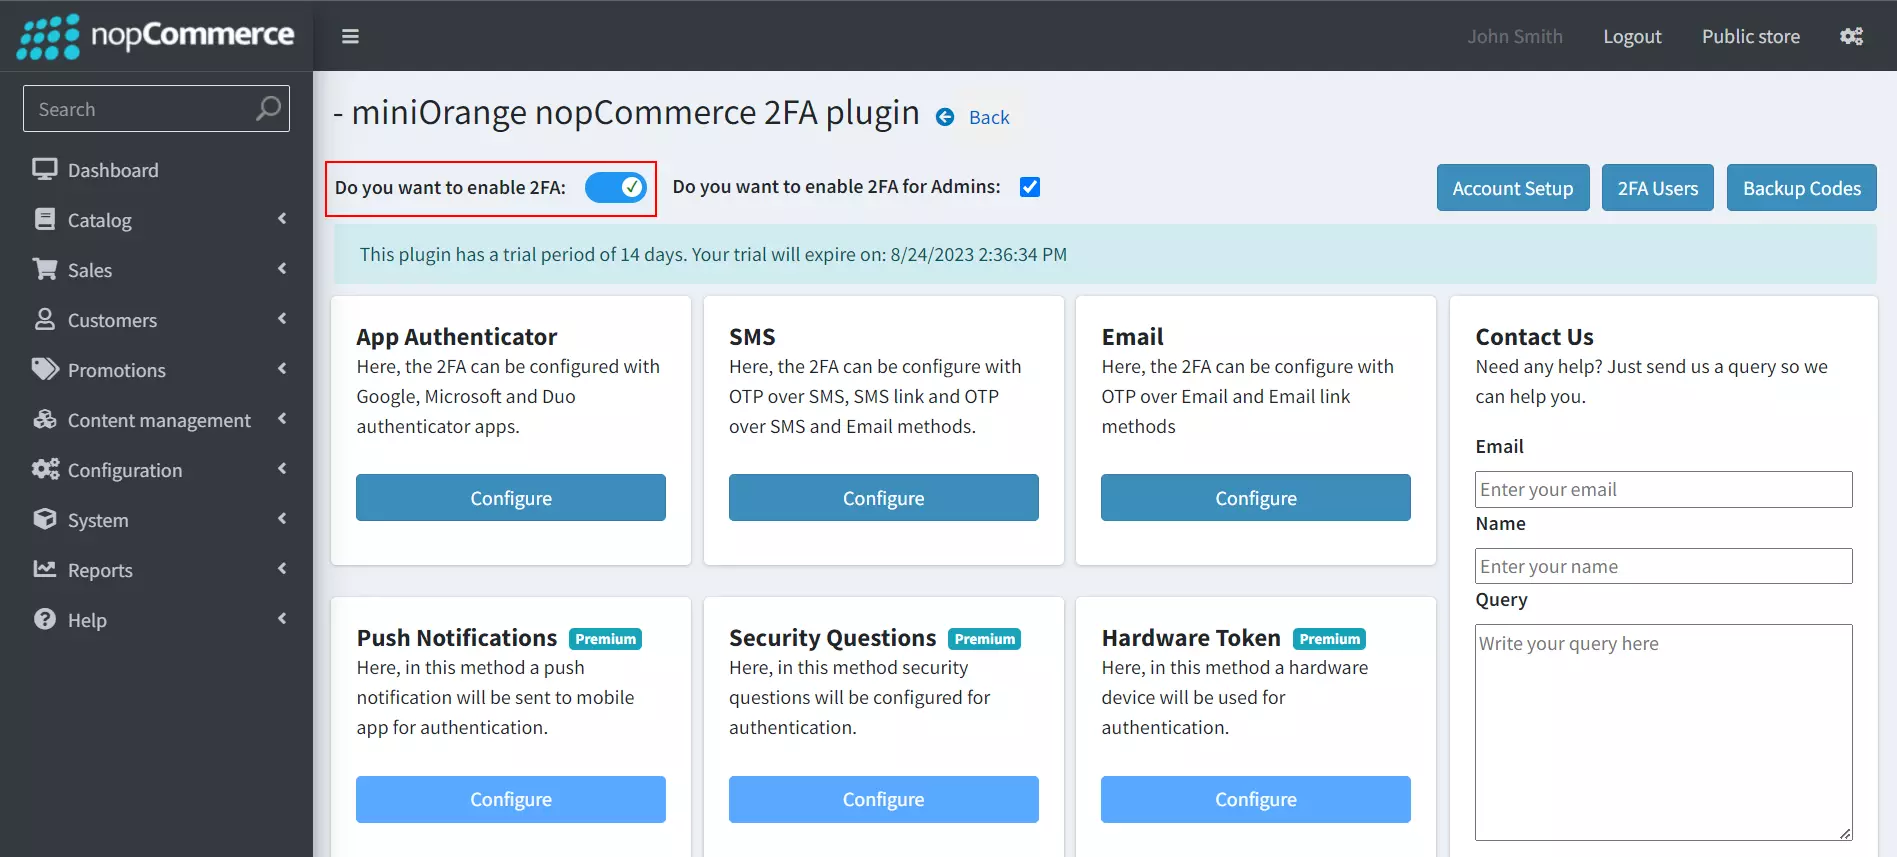 nopCommerce Two-factor Authentication using Duo Authenticator | nopCommerce 2FA - Enable nopCommerce 2FA for users